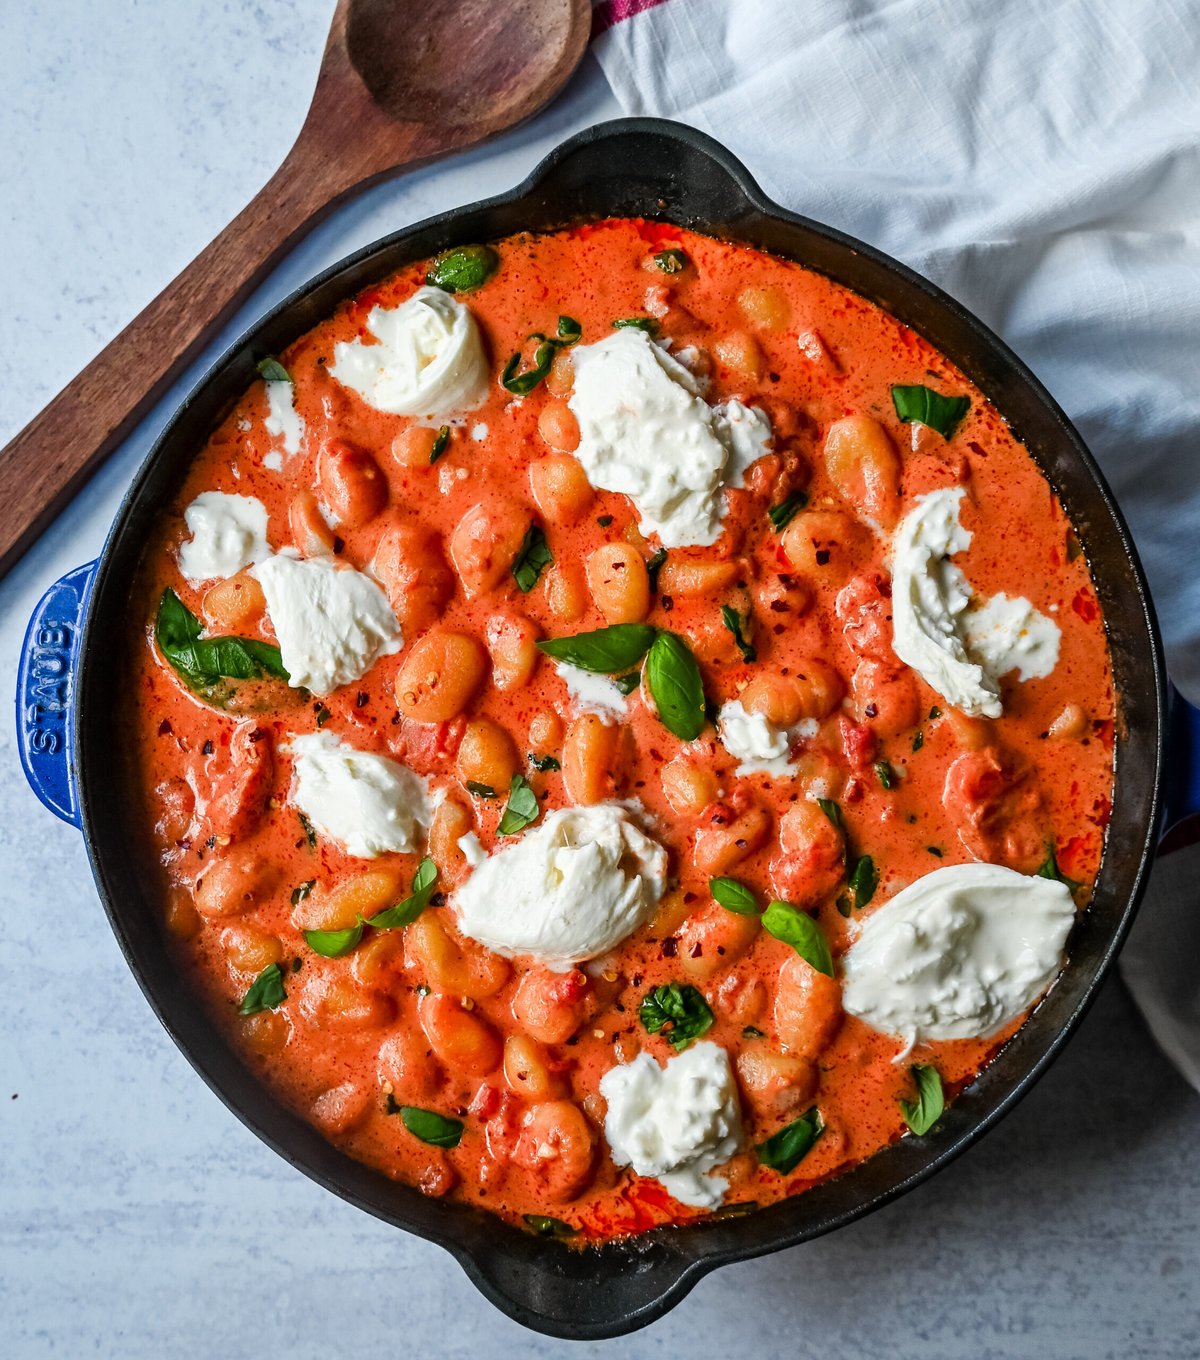 Creamy Tomato Gnocchi with Burrata. This easy 20-minute Creamy Tomato Gnocchi is made with a vibrant tomato garlic sauce tossed with cream, fresh basil, and gnocchi and topped with fresh burrata cheese. A simple, quick, and easy dinner full of flavor!